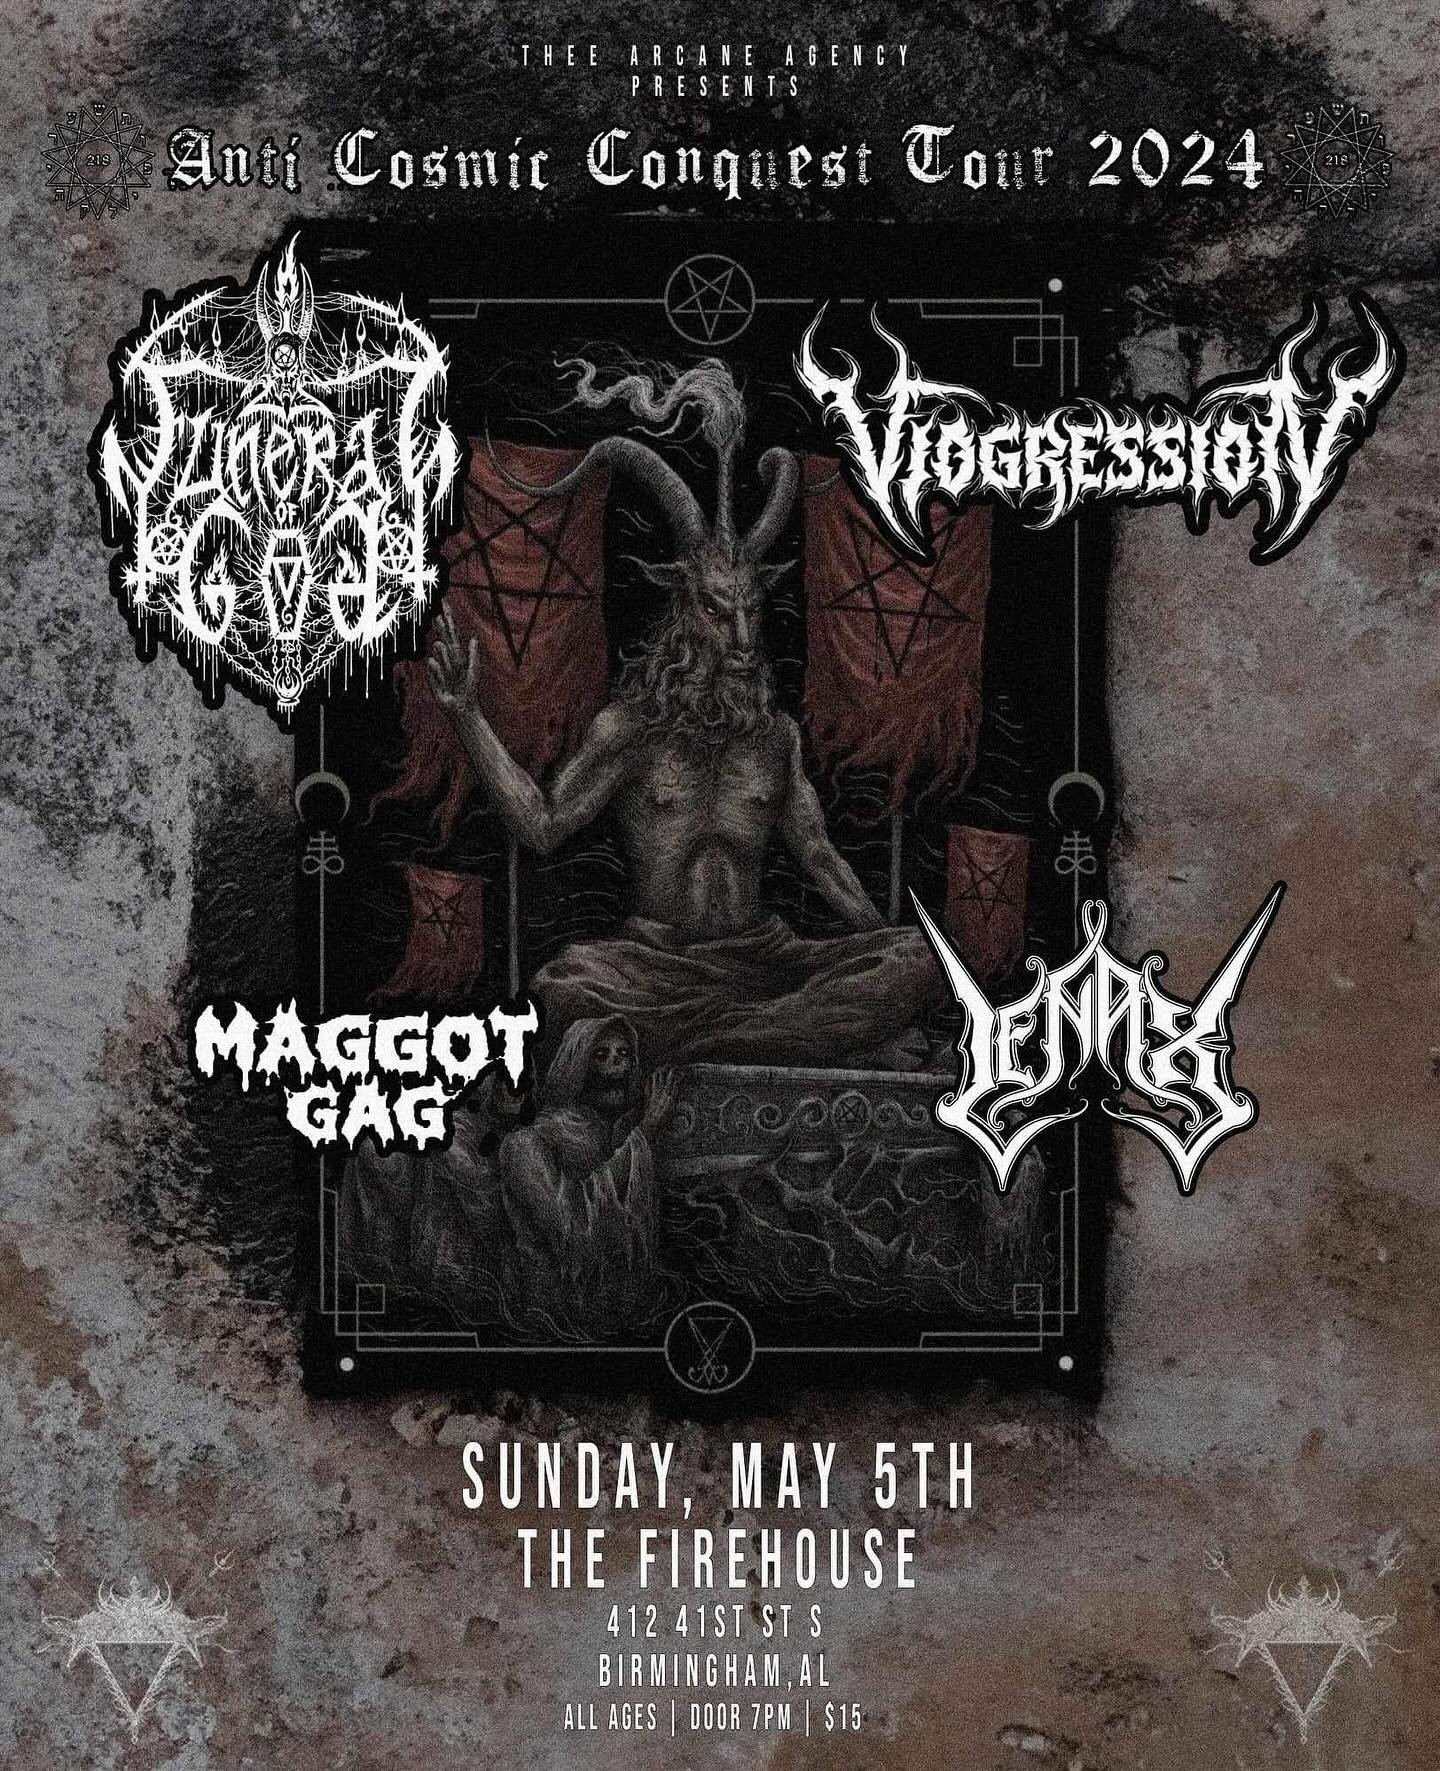 This Sunday! We&rsquo;ve got @funeralofgodofficial @viogressionofficial Maggot Gag and @lenaxmetal at @firehousecommunity !

Remember, the venue is a sober space, so no alcohol please!